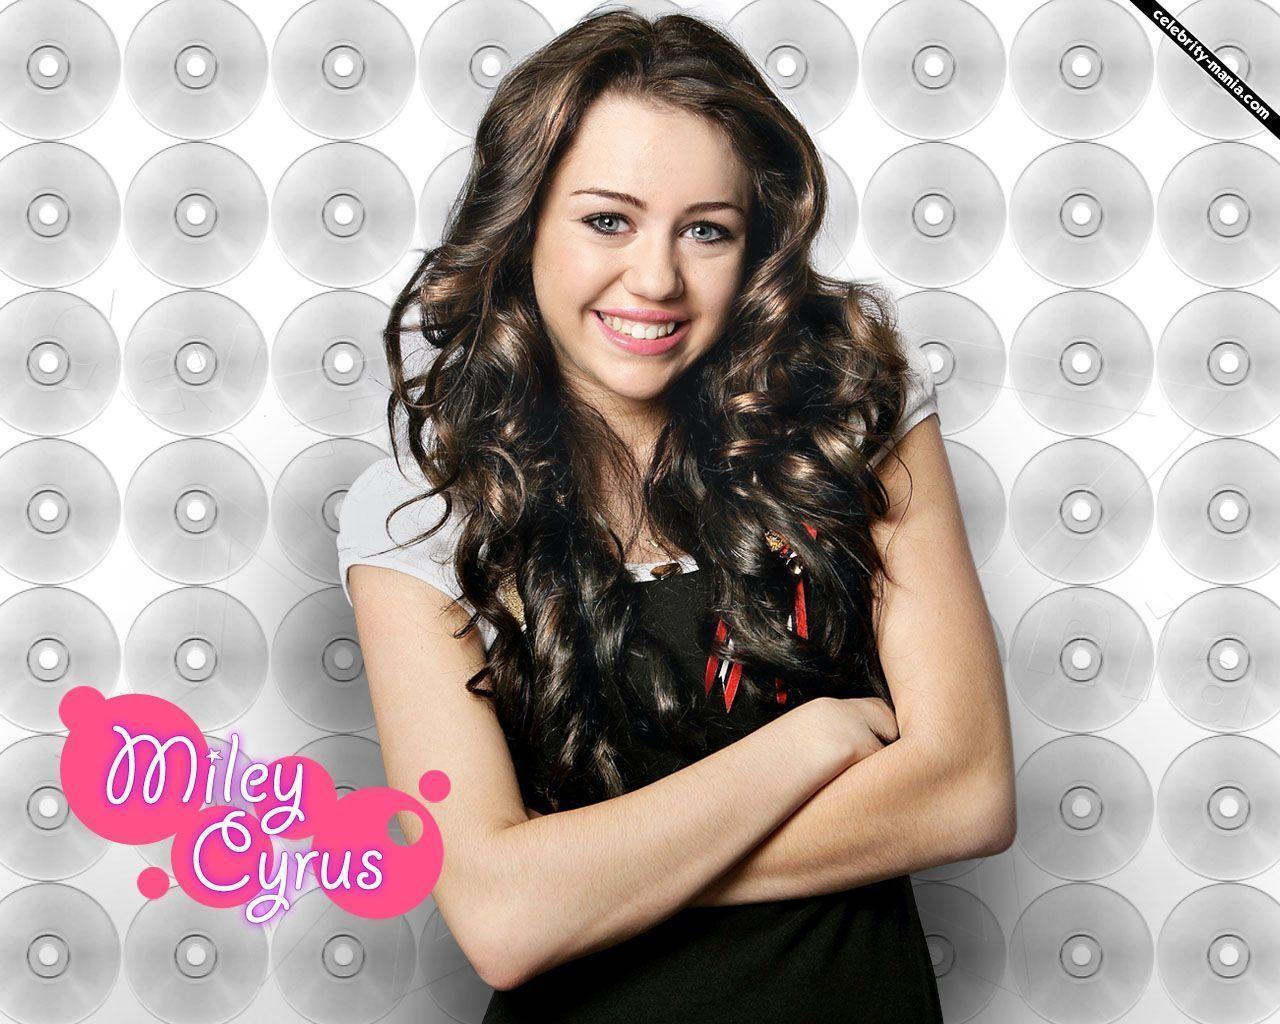 miley cyrus wallpaper Image, Graphics, Comments and Picture